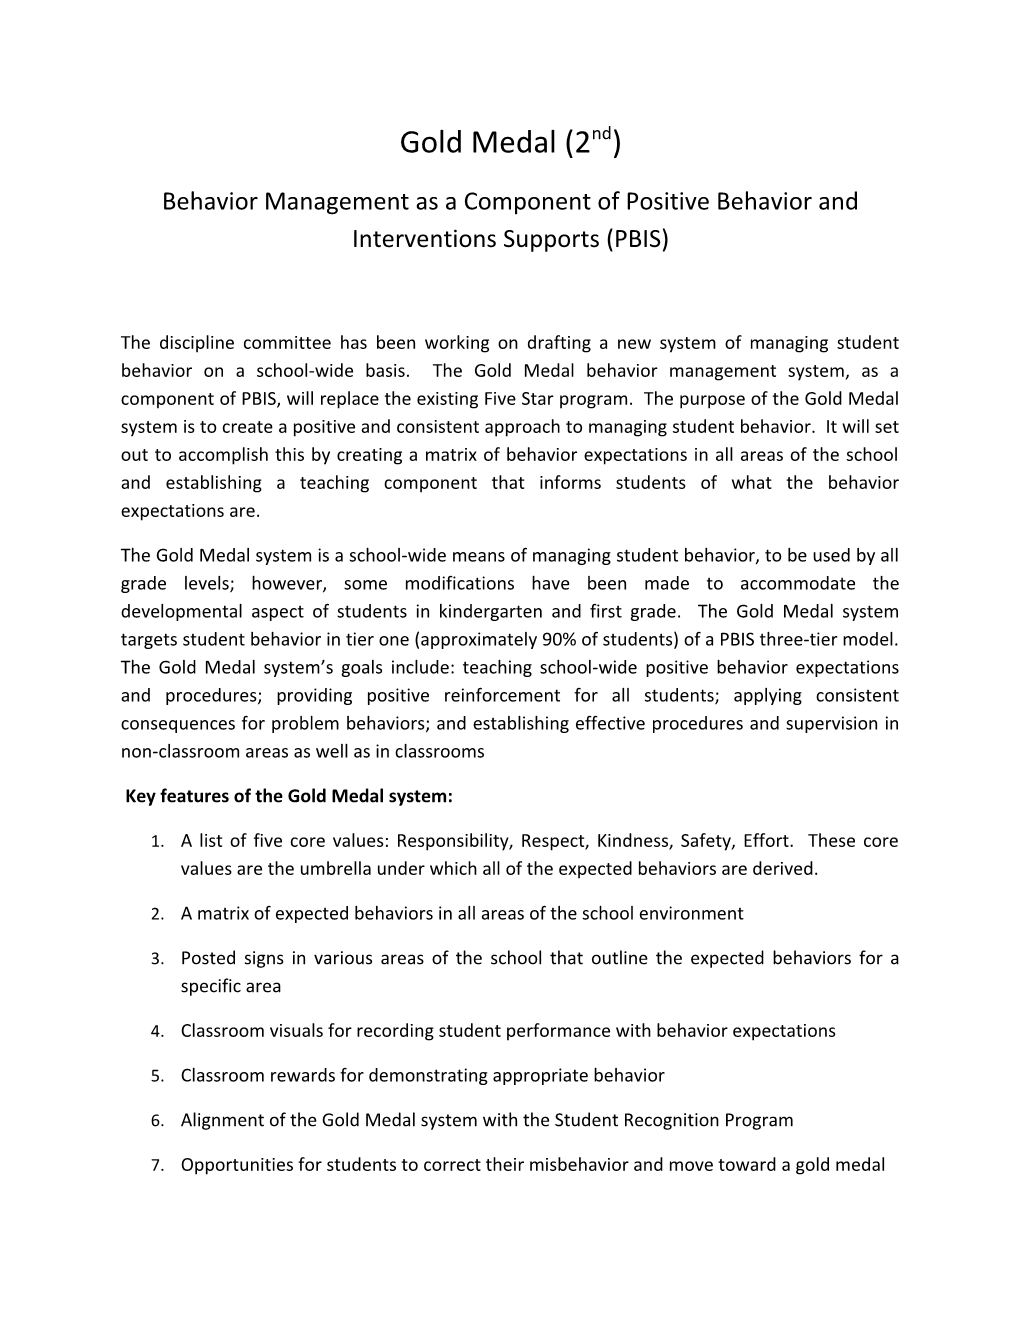 Behavior Management As a Component of Positive Behavior and Interventions Supports (PBIS)